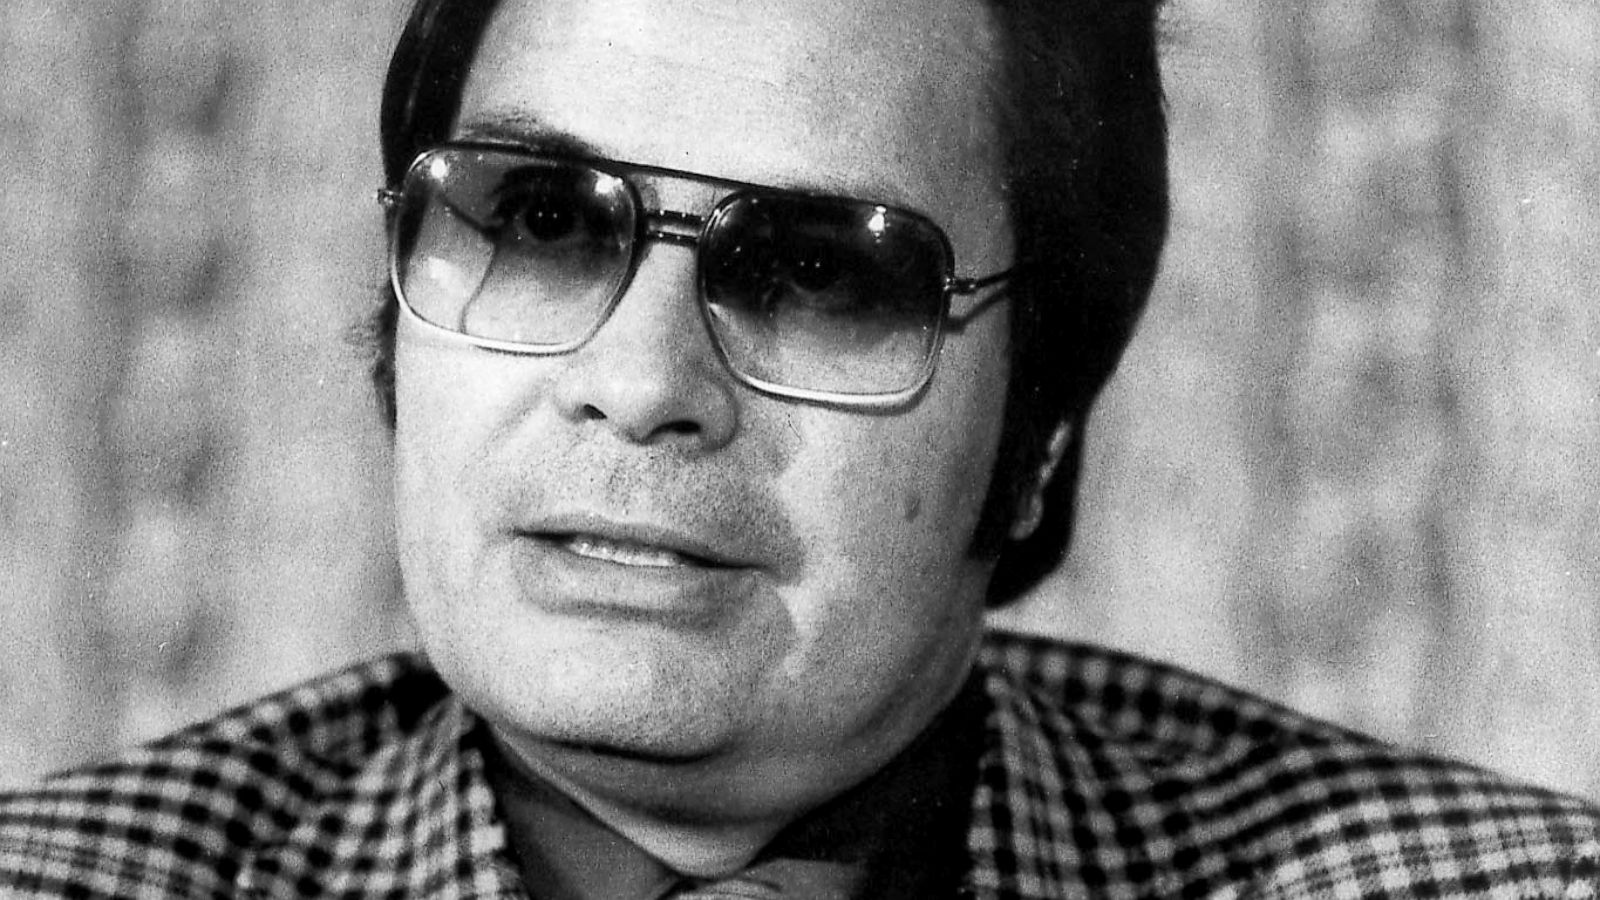 The Triple Murder Of Jonestown Defectors Remains Unsolved More Than 40 Years Later